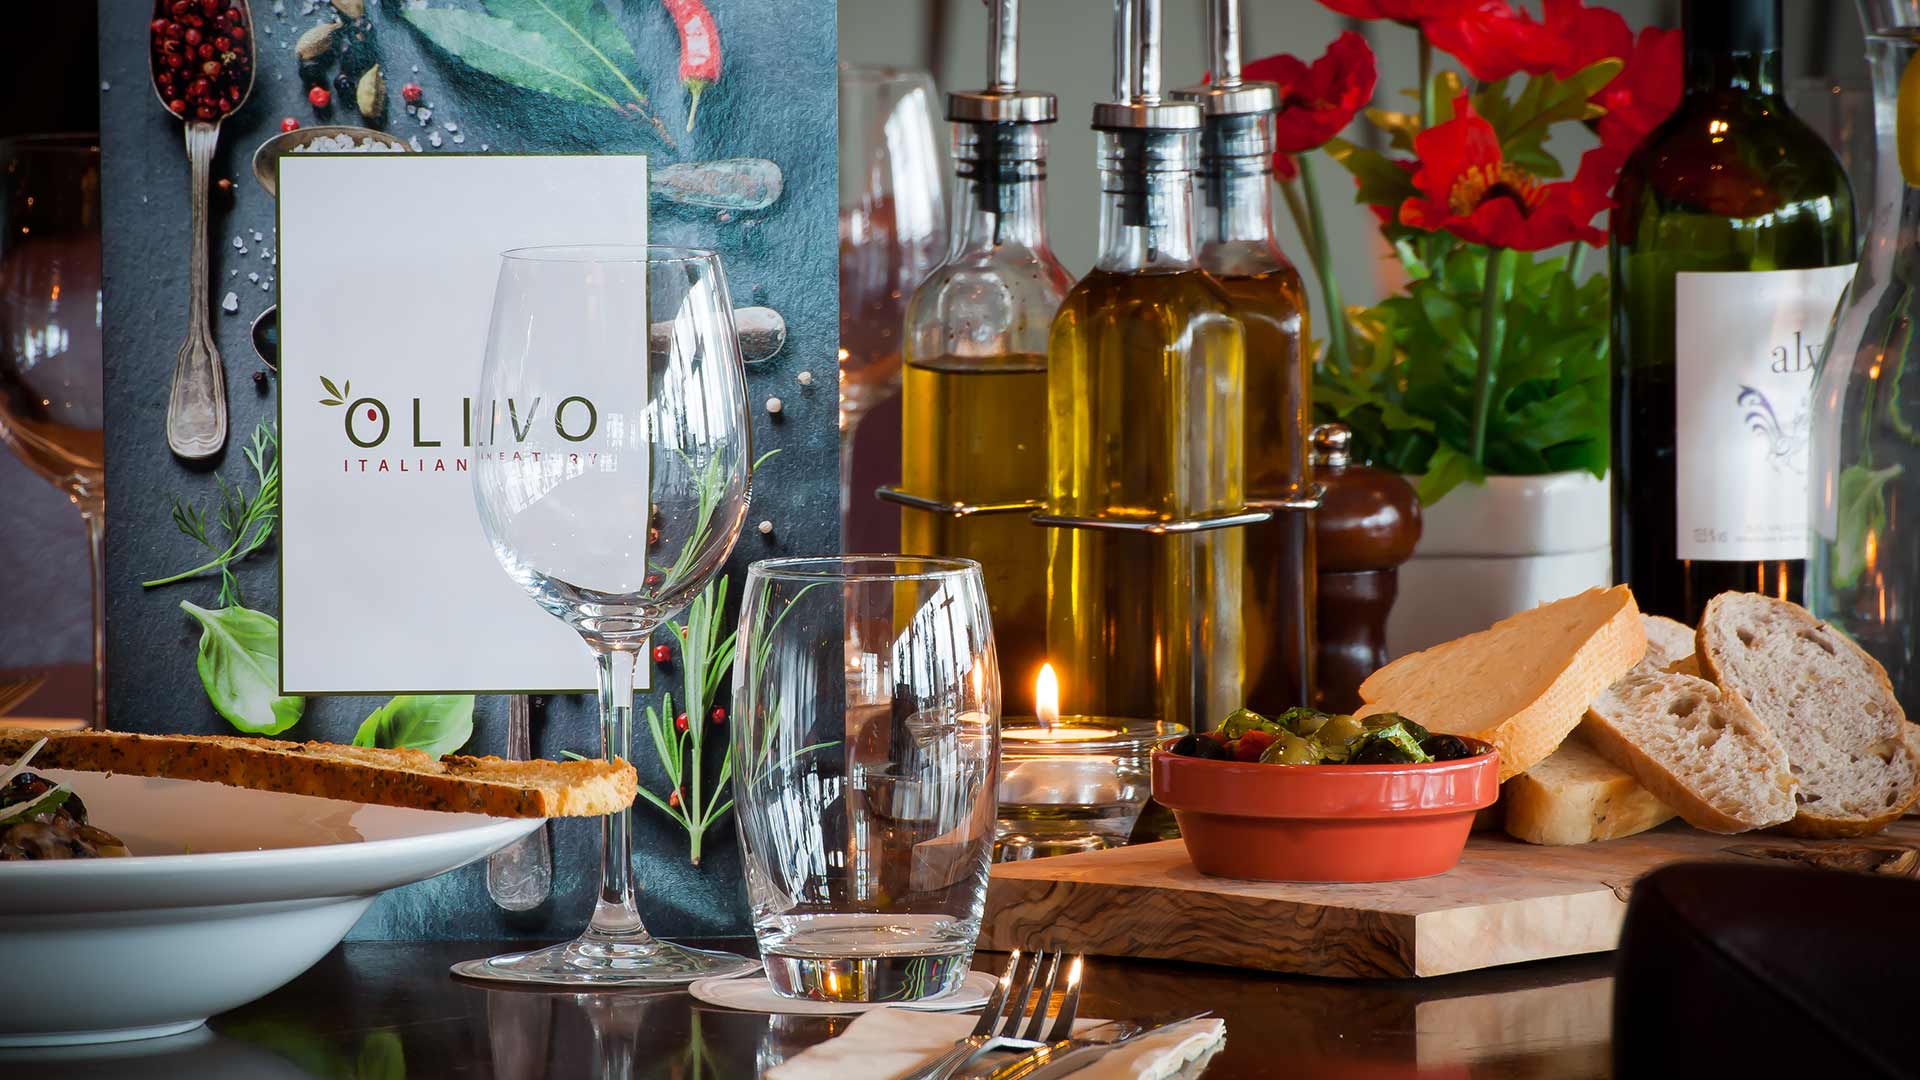 Wine, bread and hors d'oeuvres at the Olivo Italian Restaurant